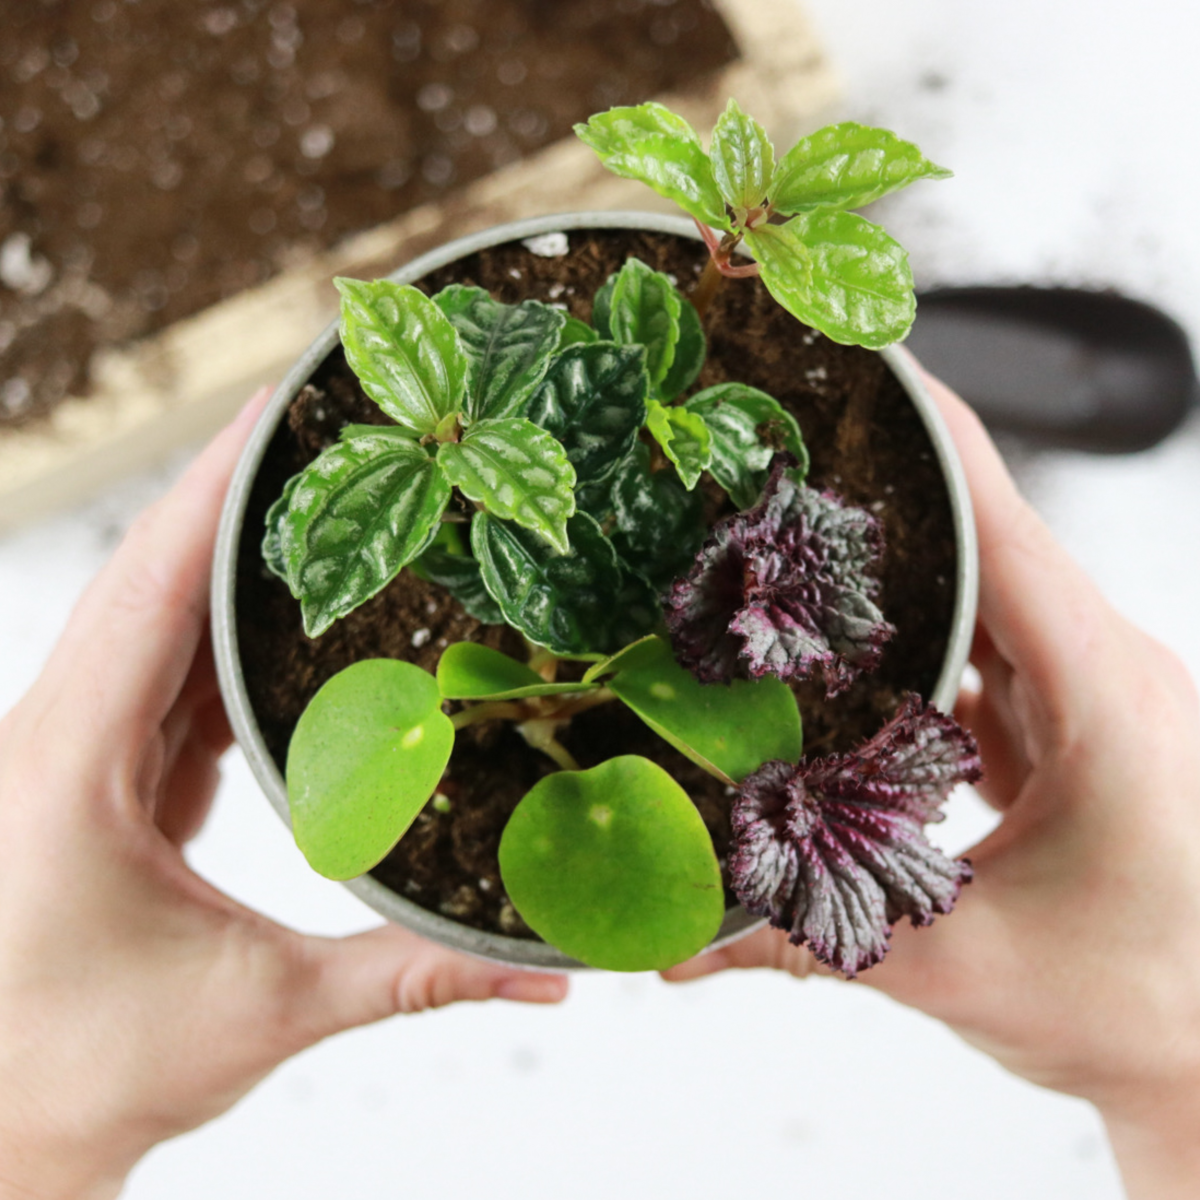 Up your indoor gardening game by DIYing your very own mini indoor garden. Mix different colors, leaf shapes, and textures to create a mini garden that pops in your home! Clever Bloom.